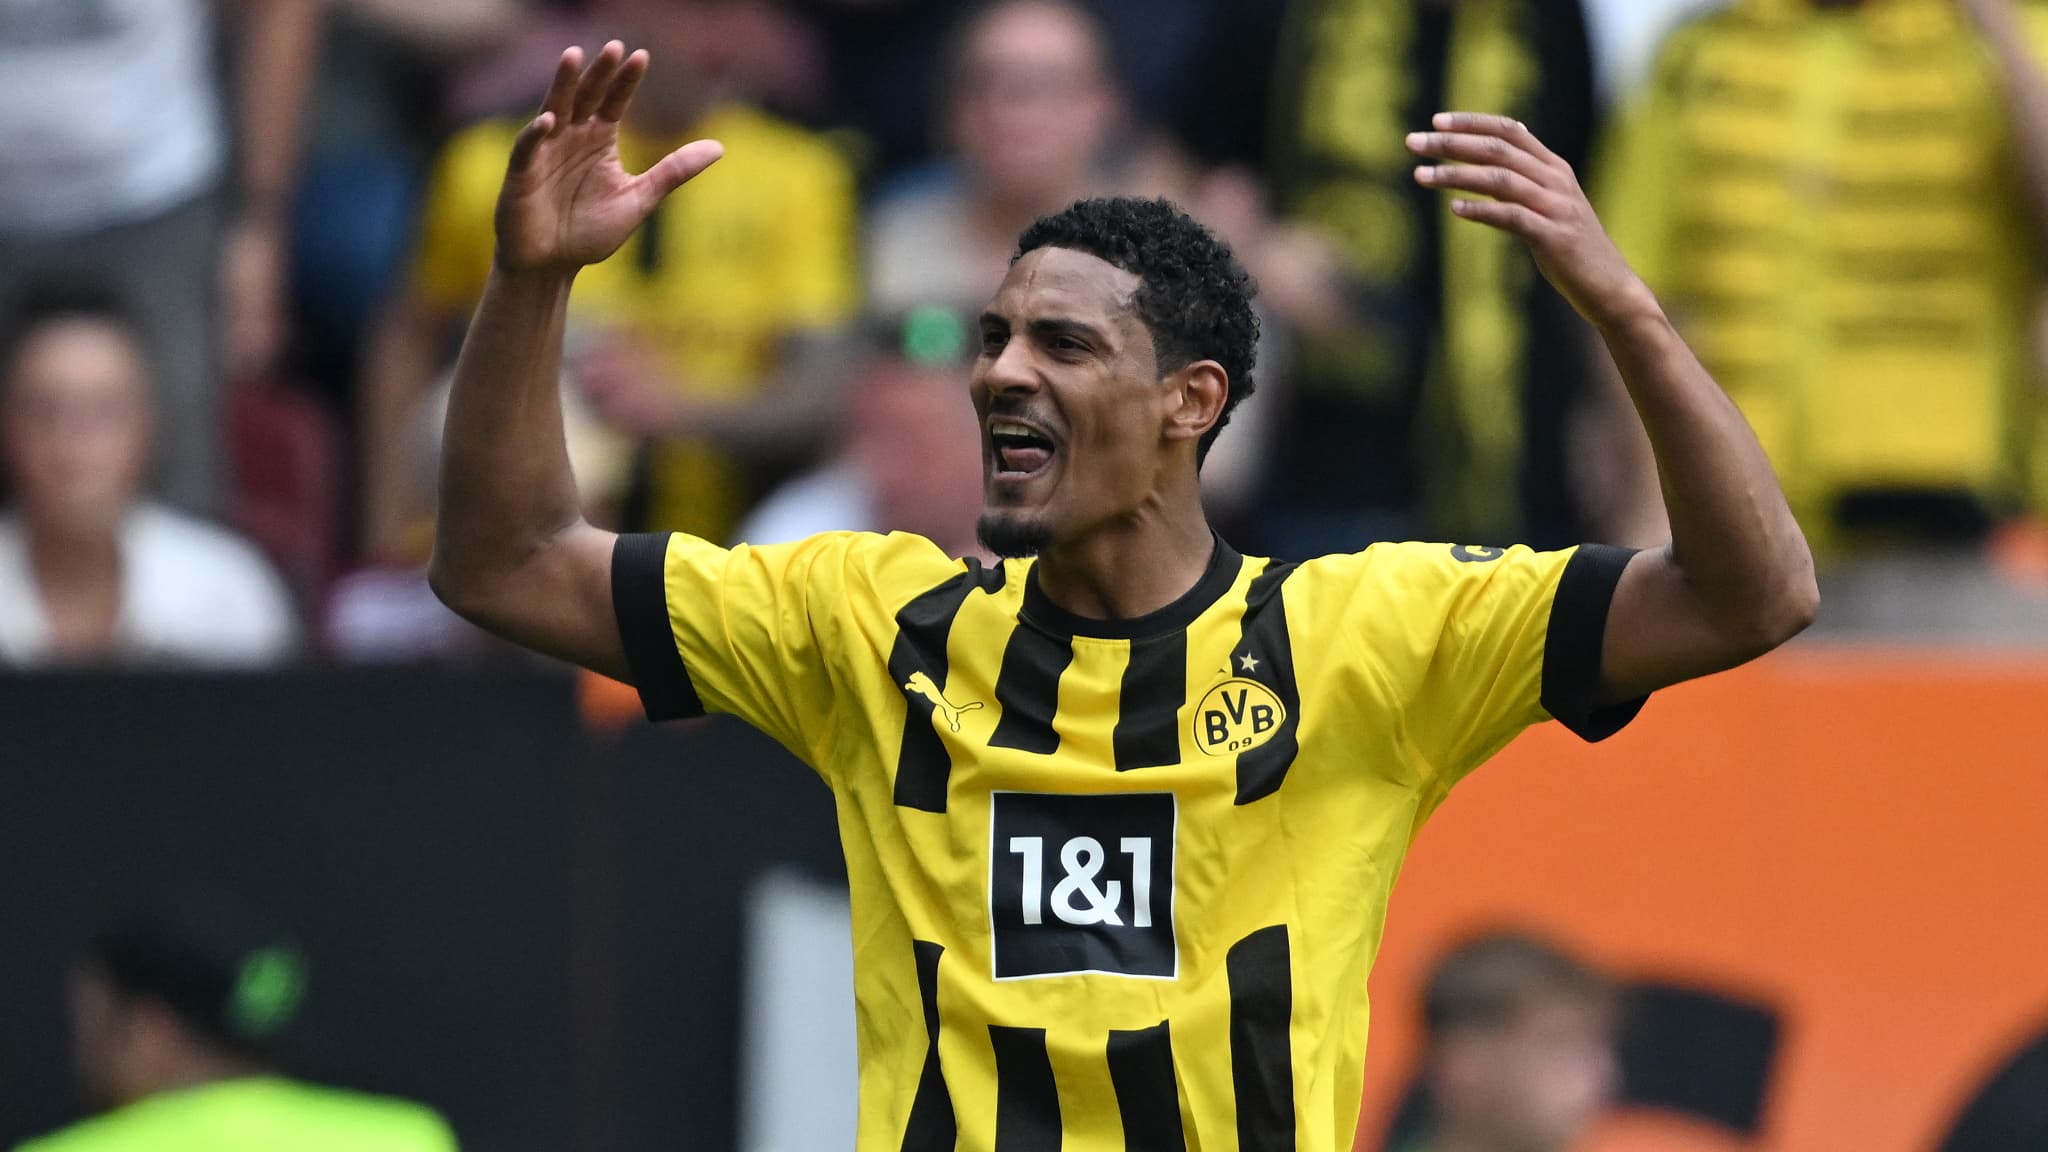 The massive coup for Dortmund that beat Augsburg and overtook Bayern before the final day